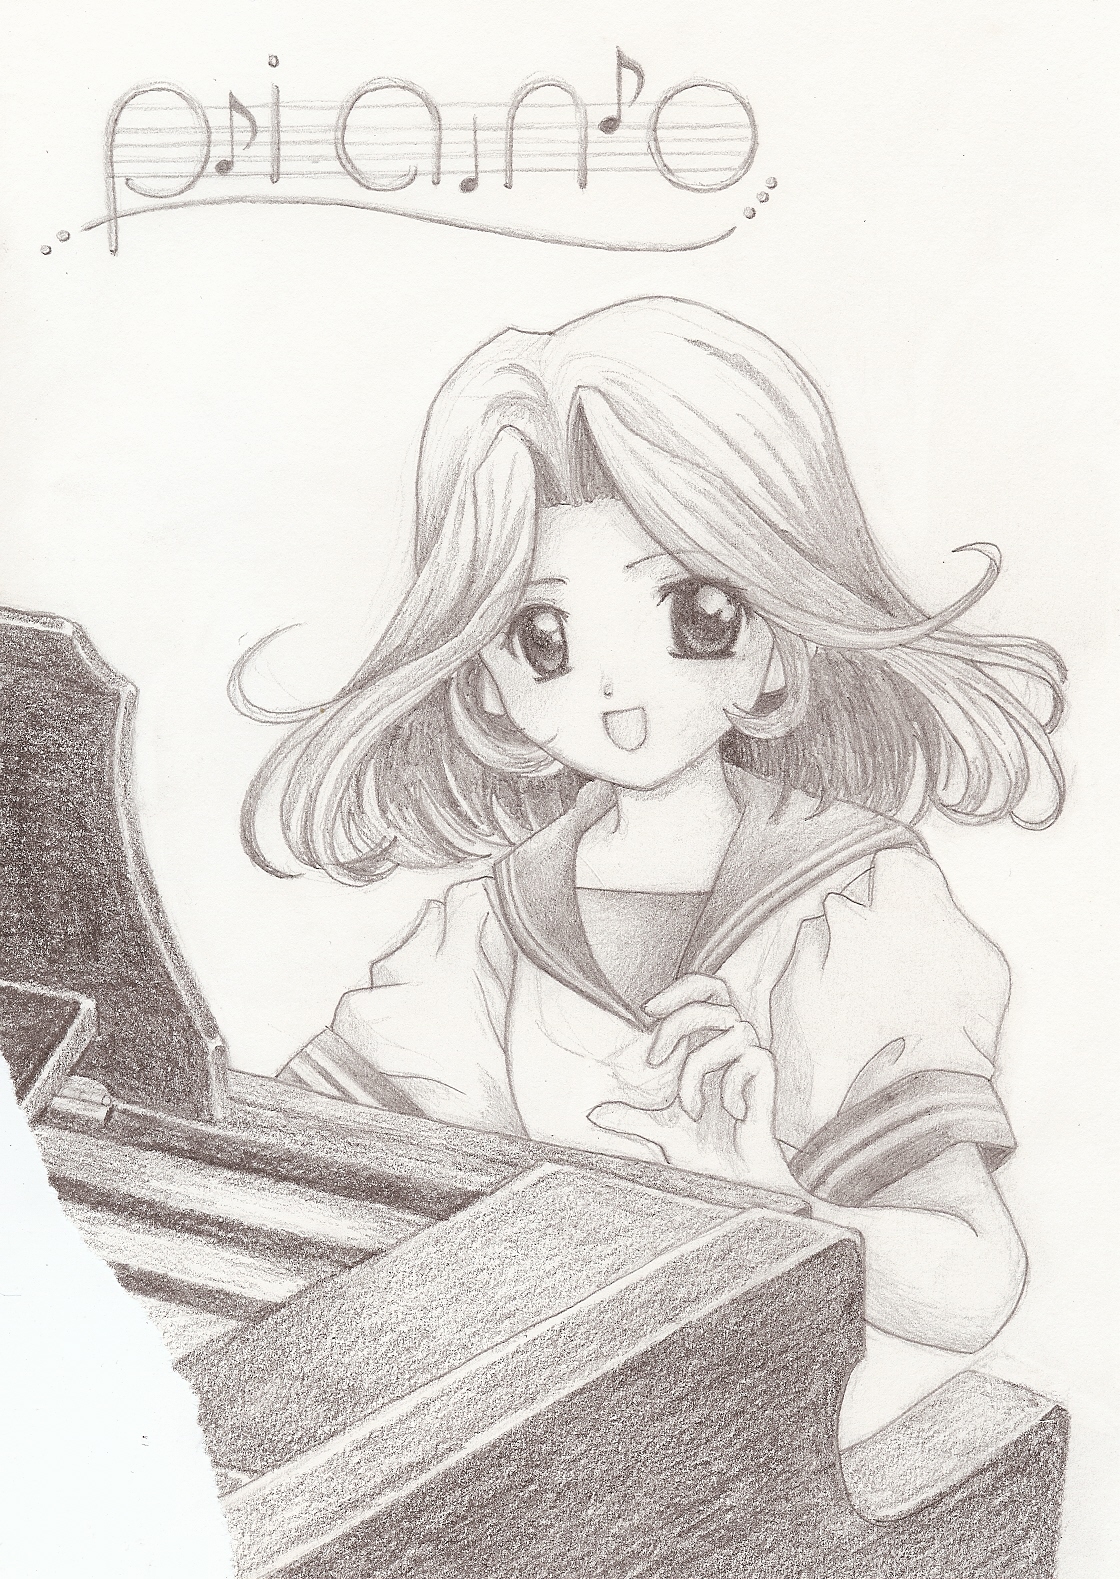 Piano by Sepia